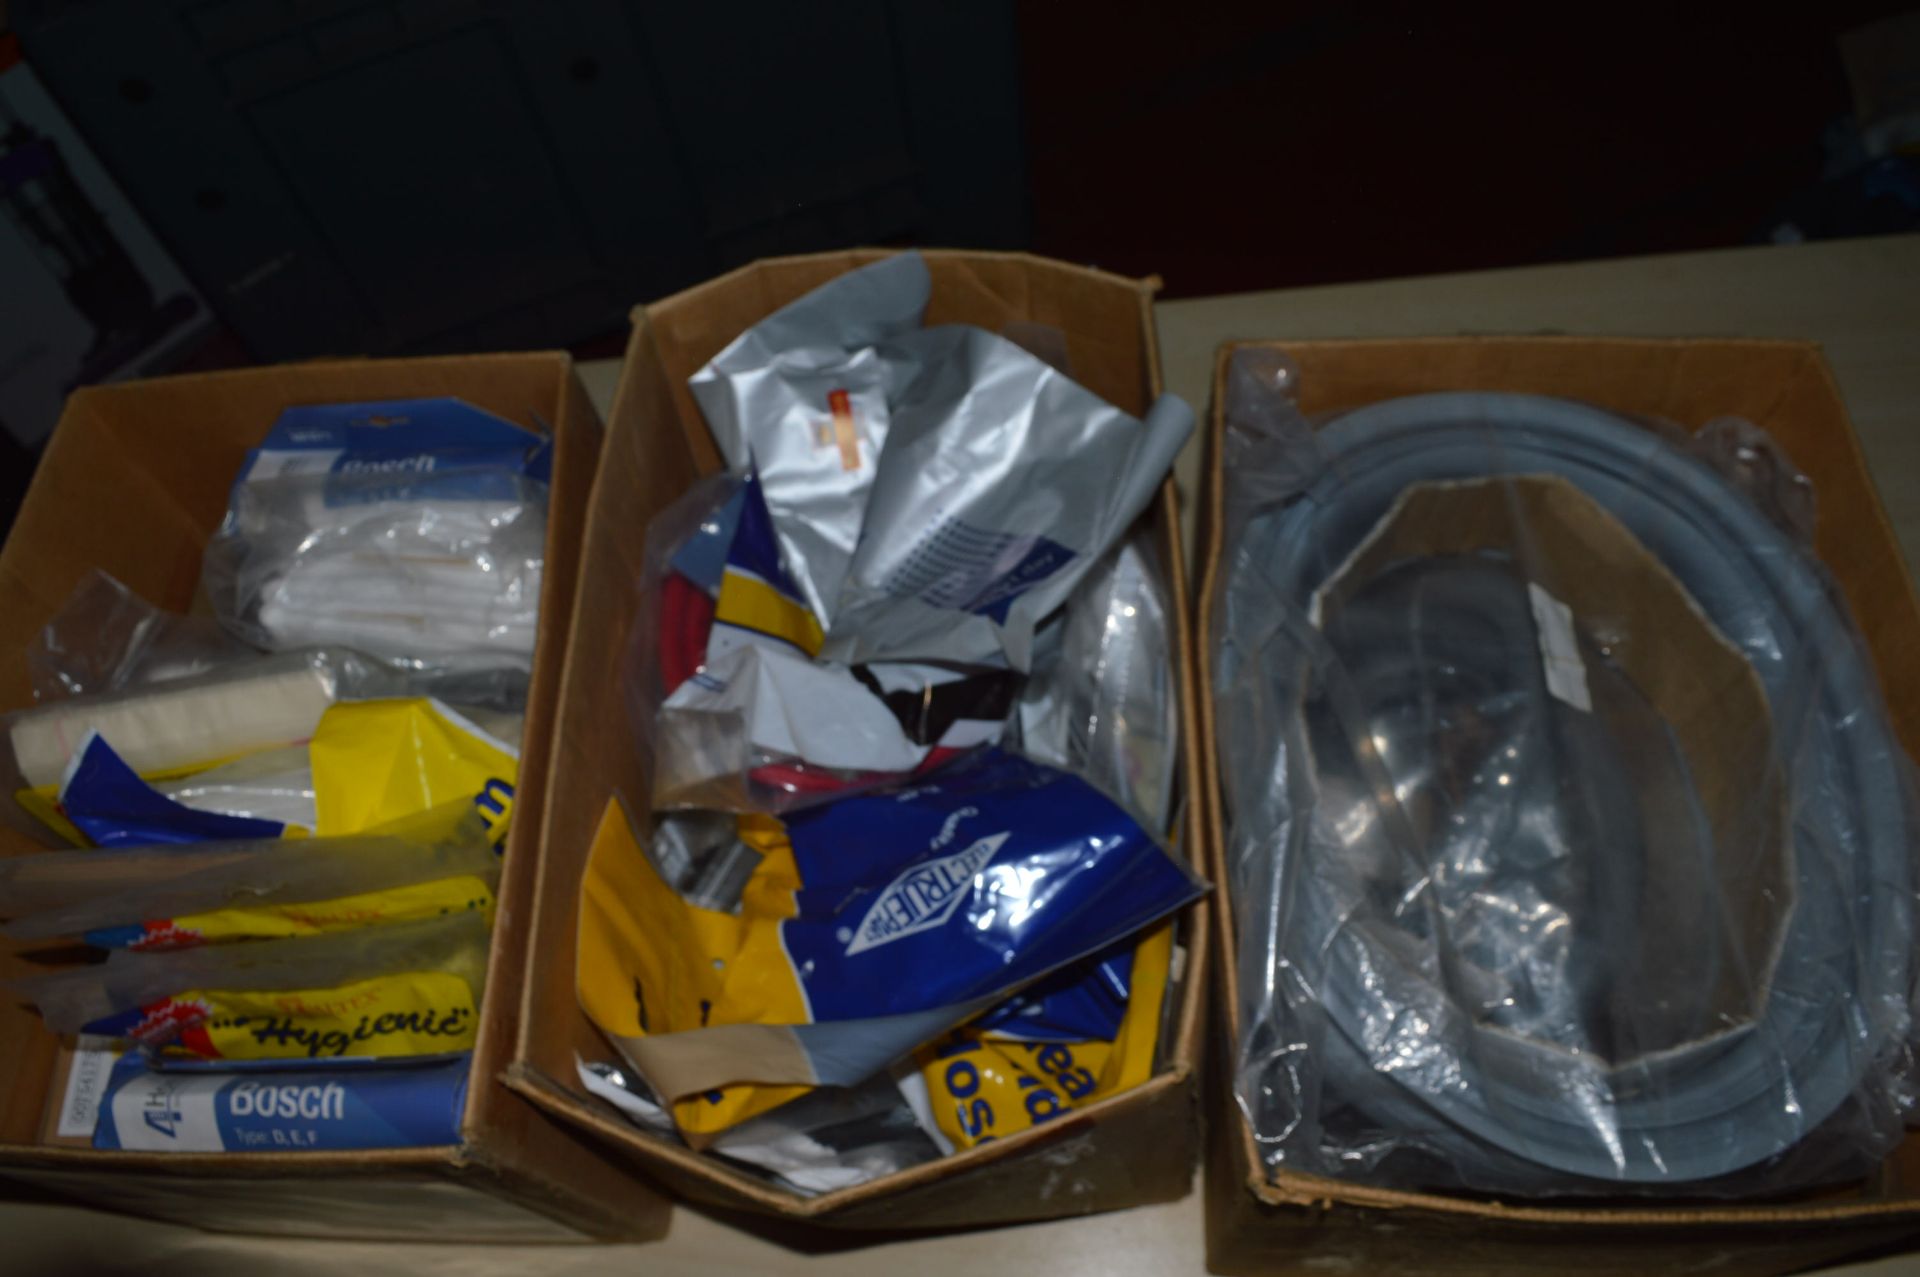 *Three Boxes of Dust Bags, Vacuum Hose Attachments, Washer Door Seal, etc.